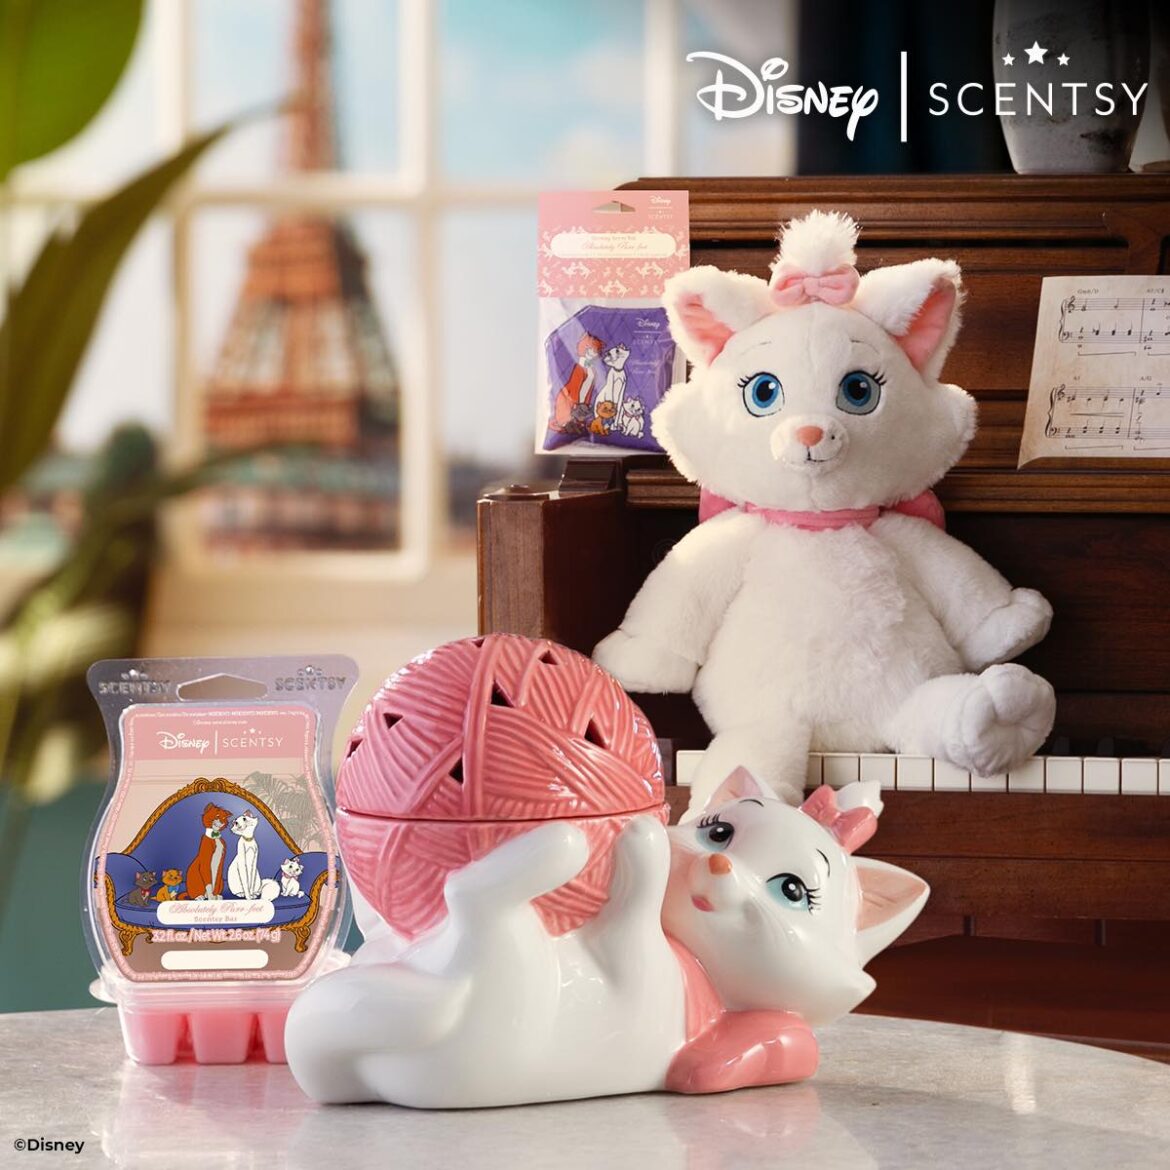 A purr-fect Scentsy collection inspired by Disney’s The Aristocats is Coming Soon!